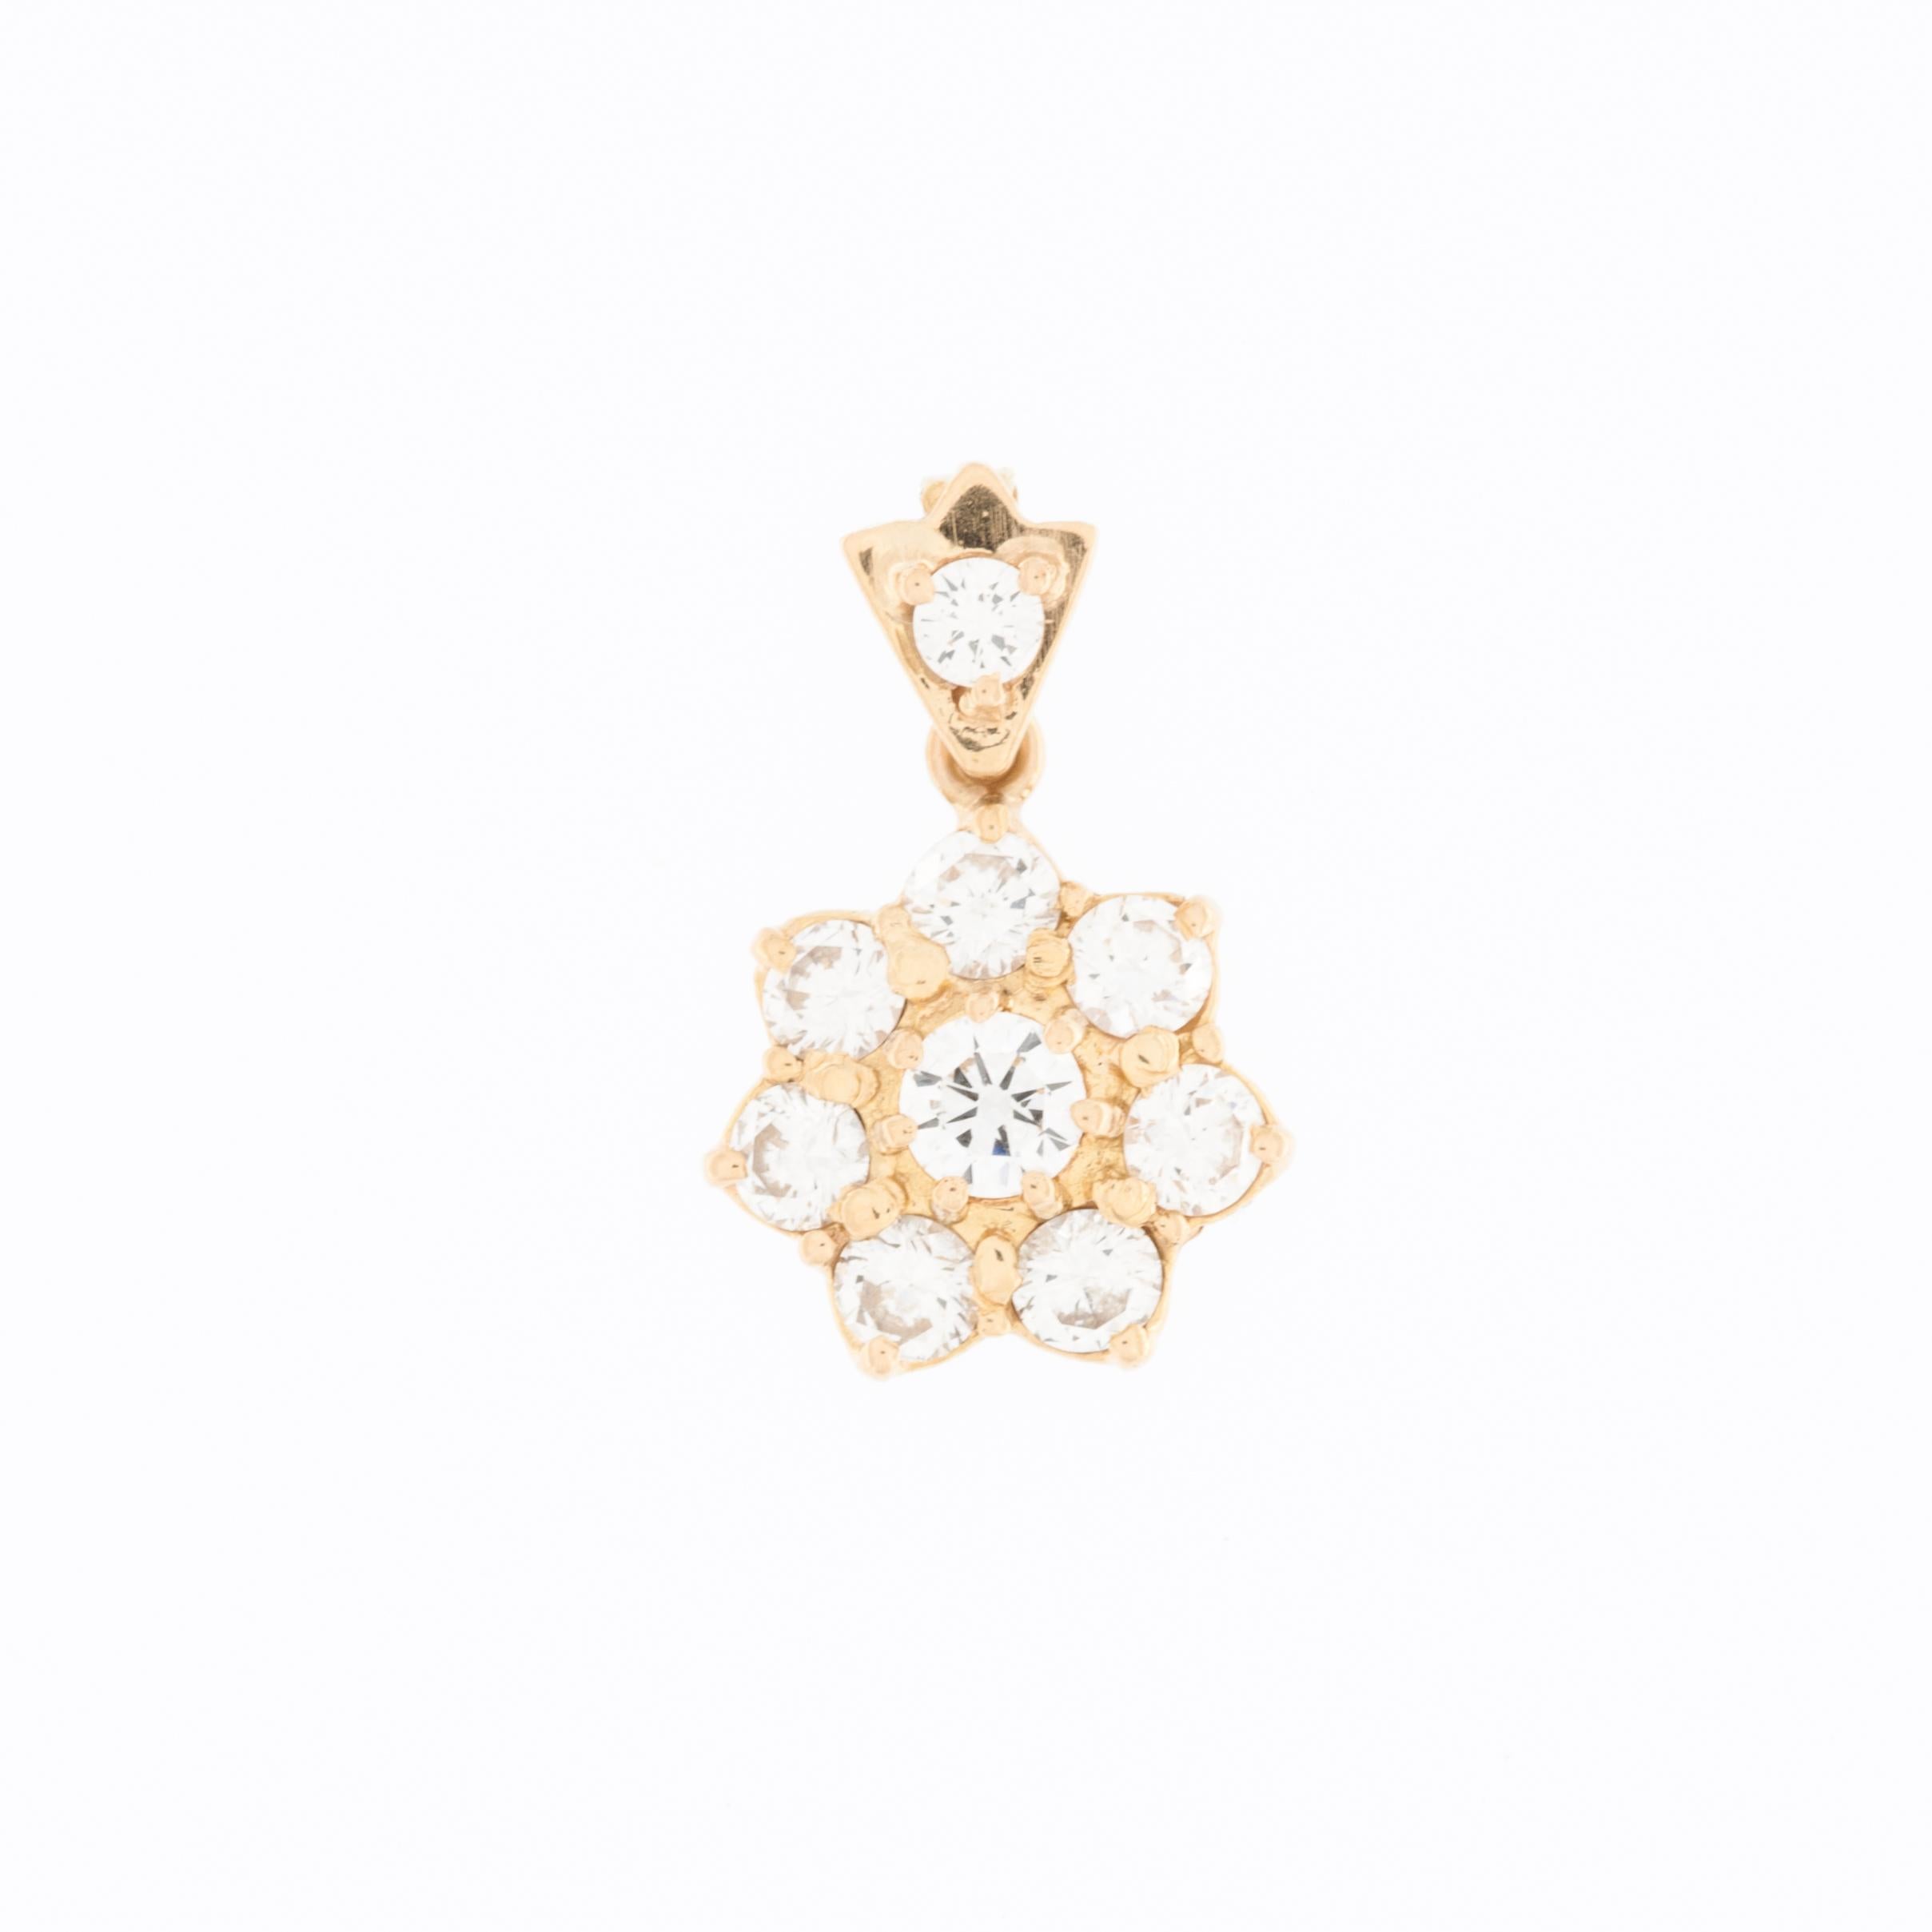 The HRD Certified Daisy Pendant in Yellow Gold is an exquisite piece of jewelry crafted with precision and elegance. Made from 18kt yellow gold, this pendant features a stunning arrangement of diamonds, totaling 1.4 carats in weight. The diamonds